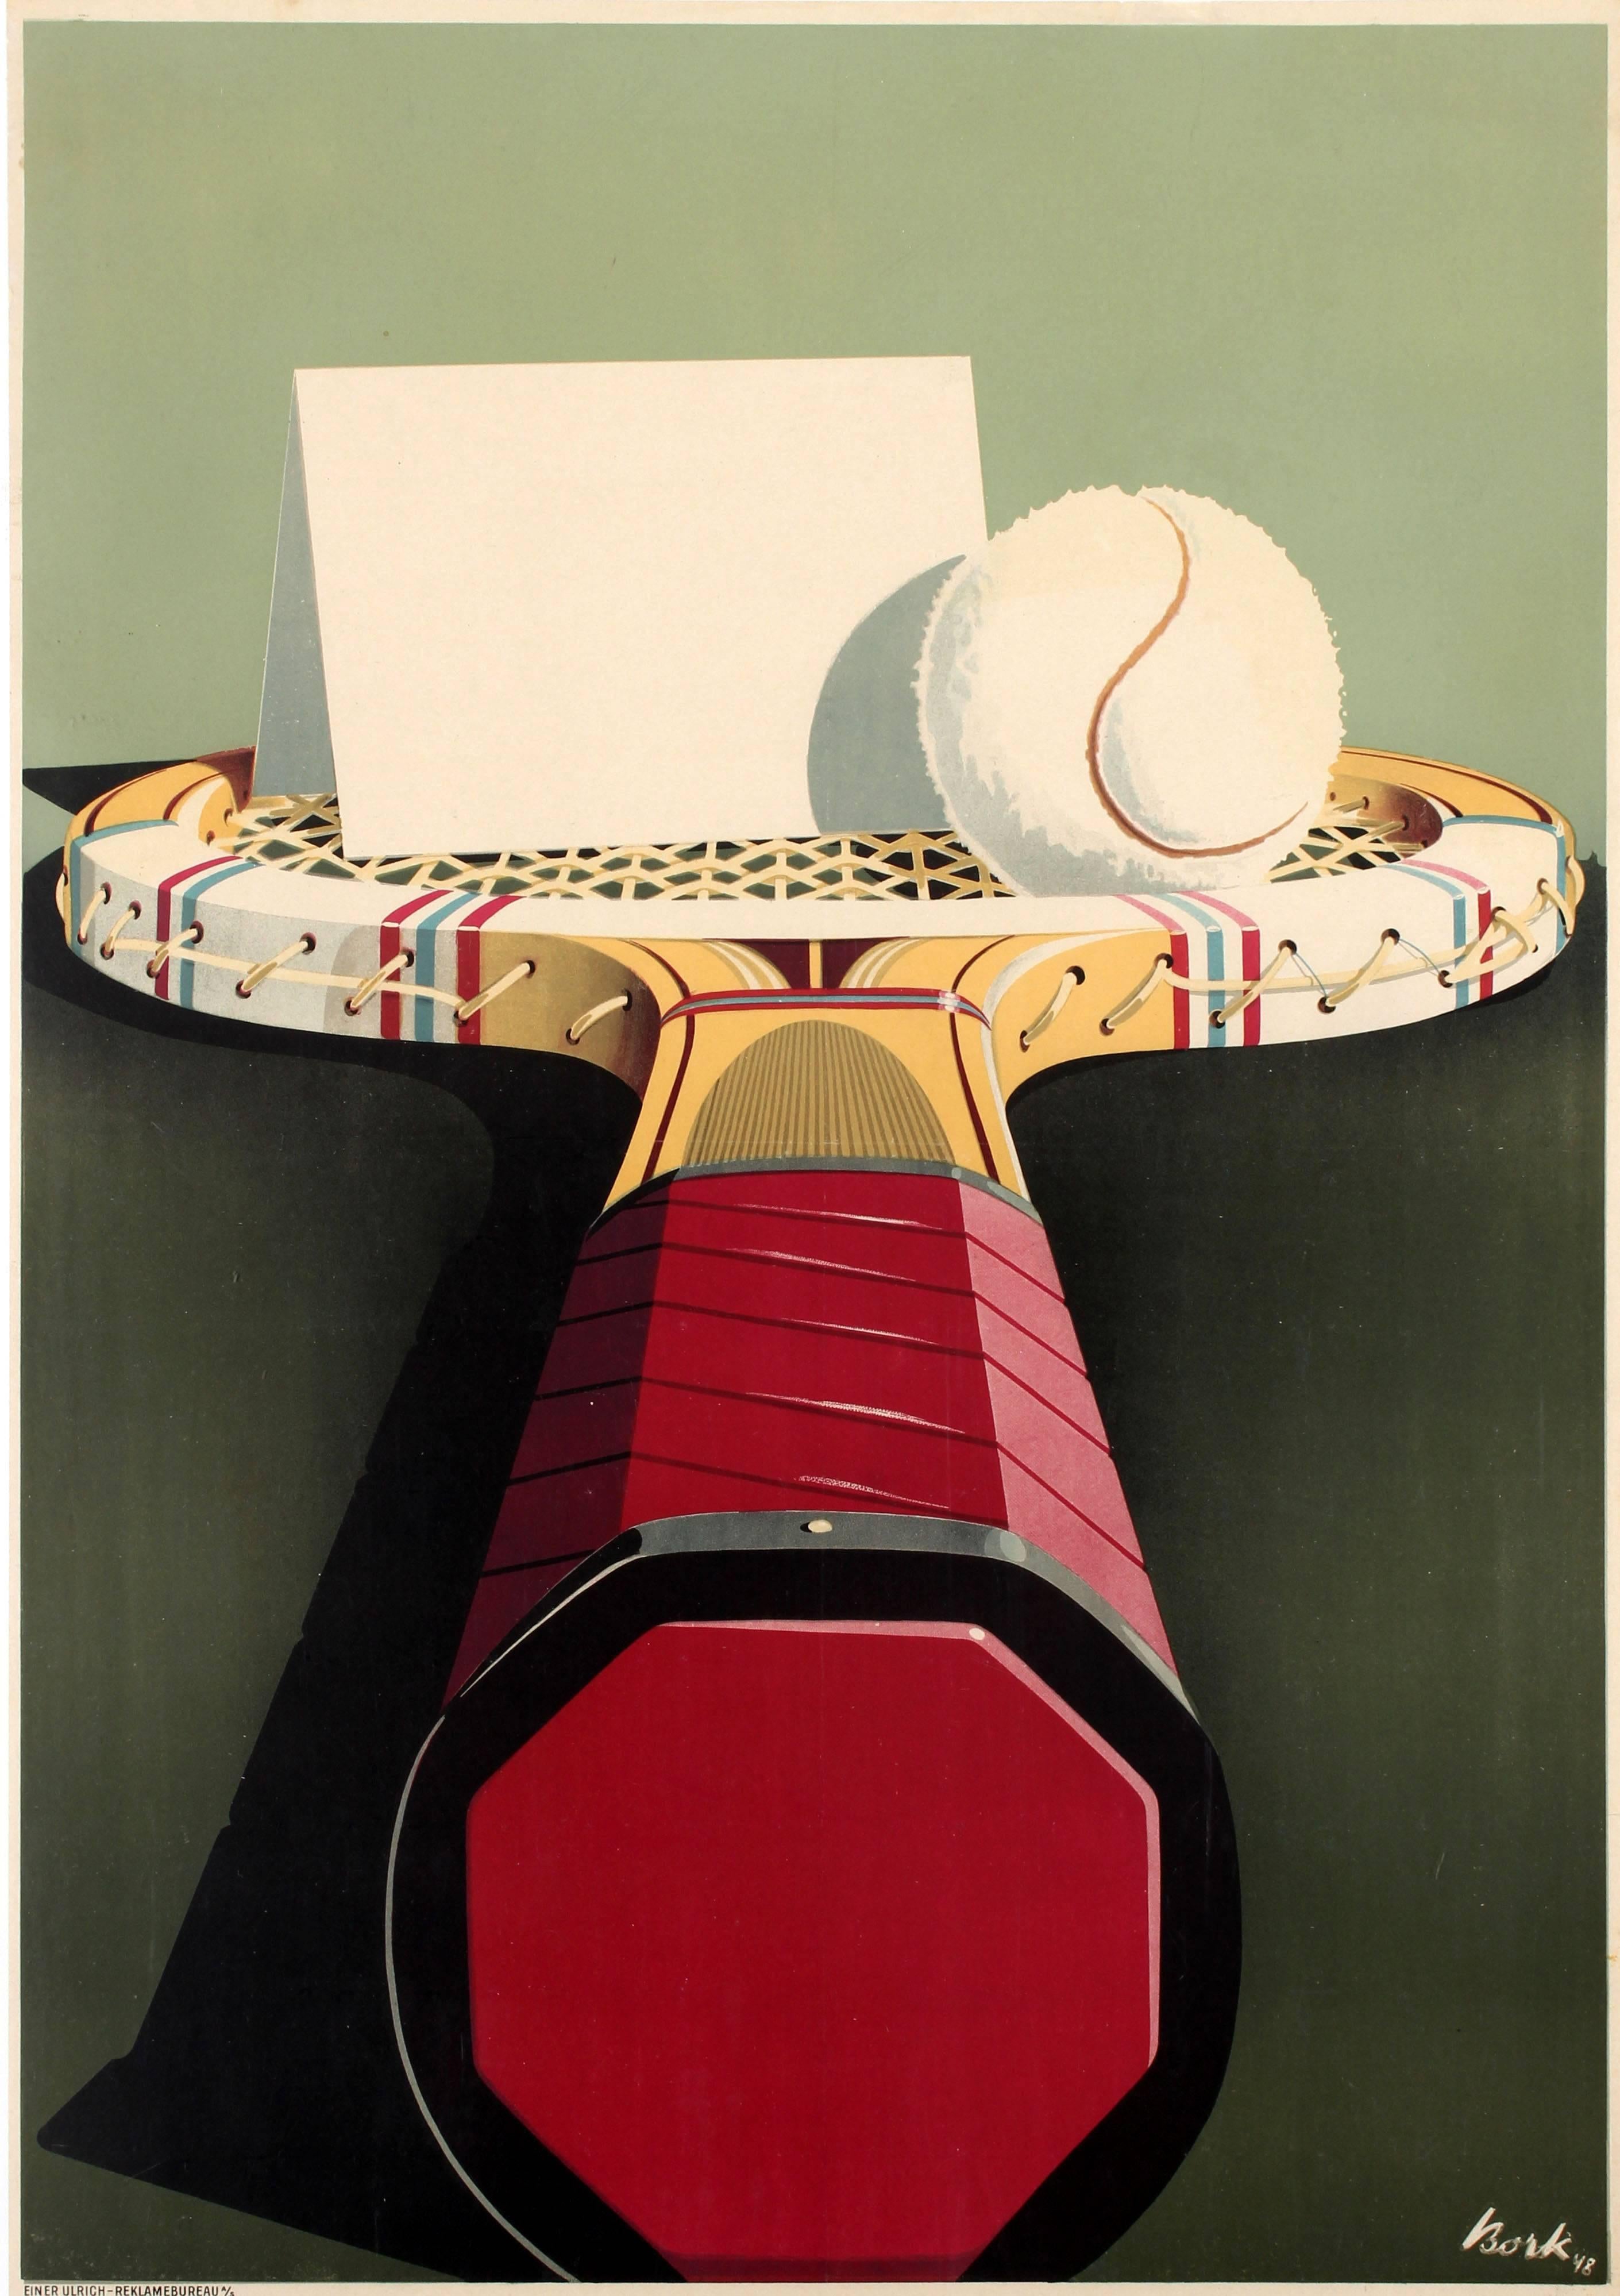 Original vintage advertising poster featuring a a tennis racket viewed from the end of the handle with a white ball and white folded card placed on the racquet strings. Printed by Einer Ulrich Reklamebureau. Einer Ulrich (1896-1969) was a Danish